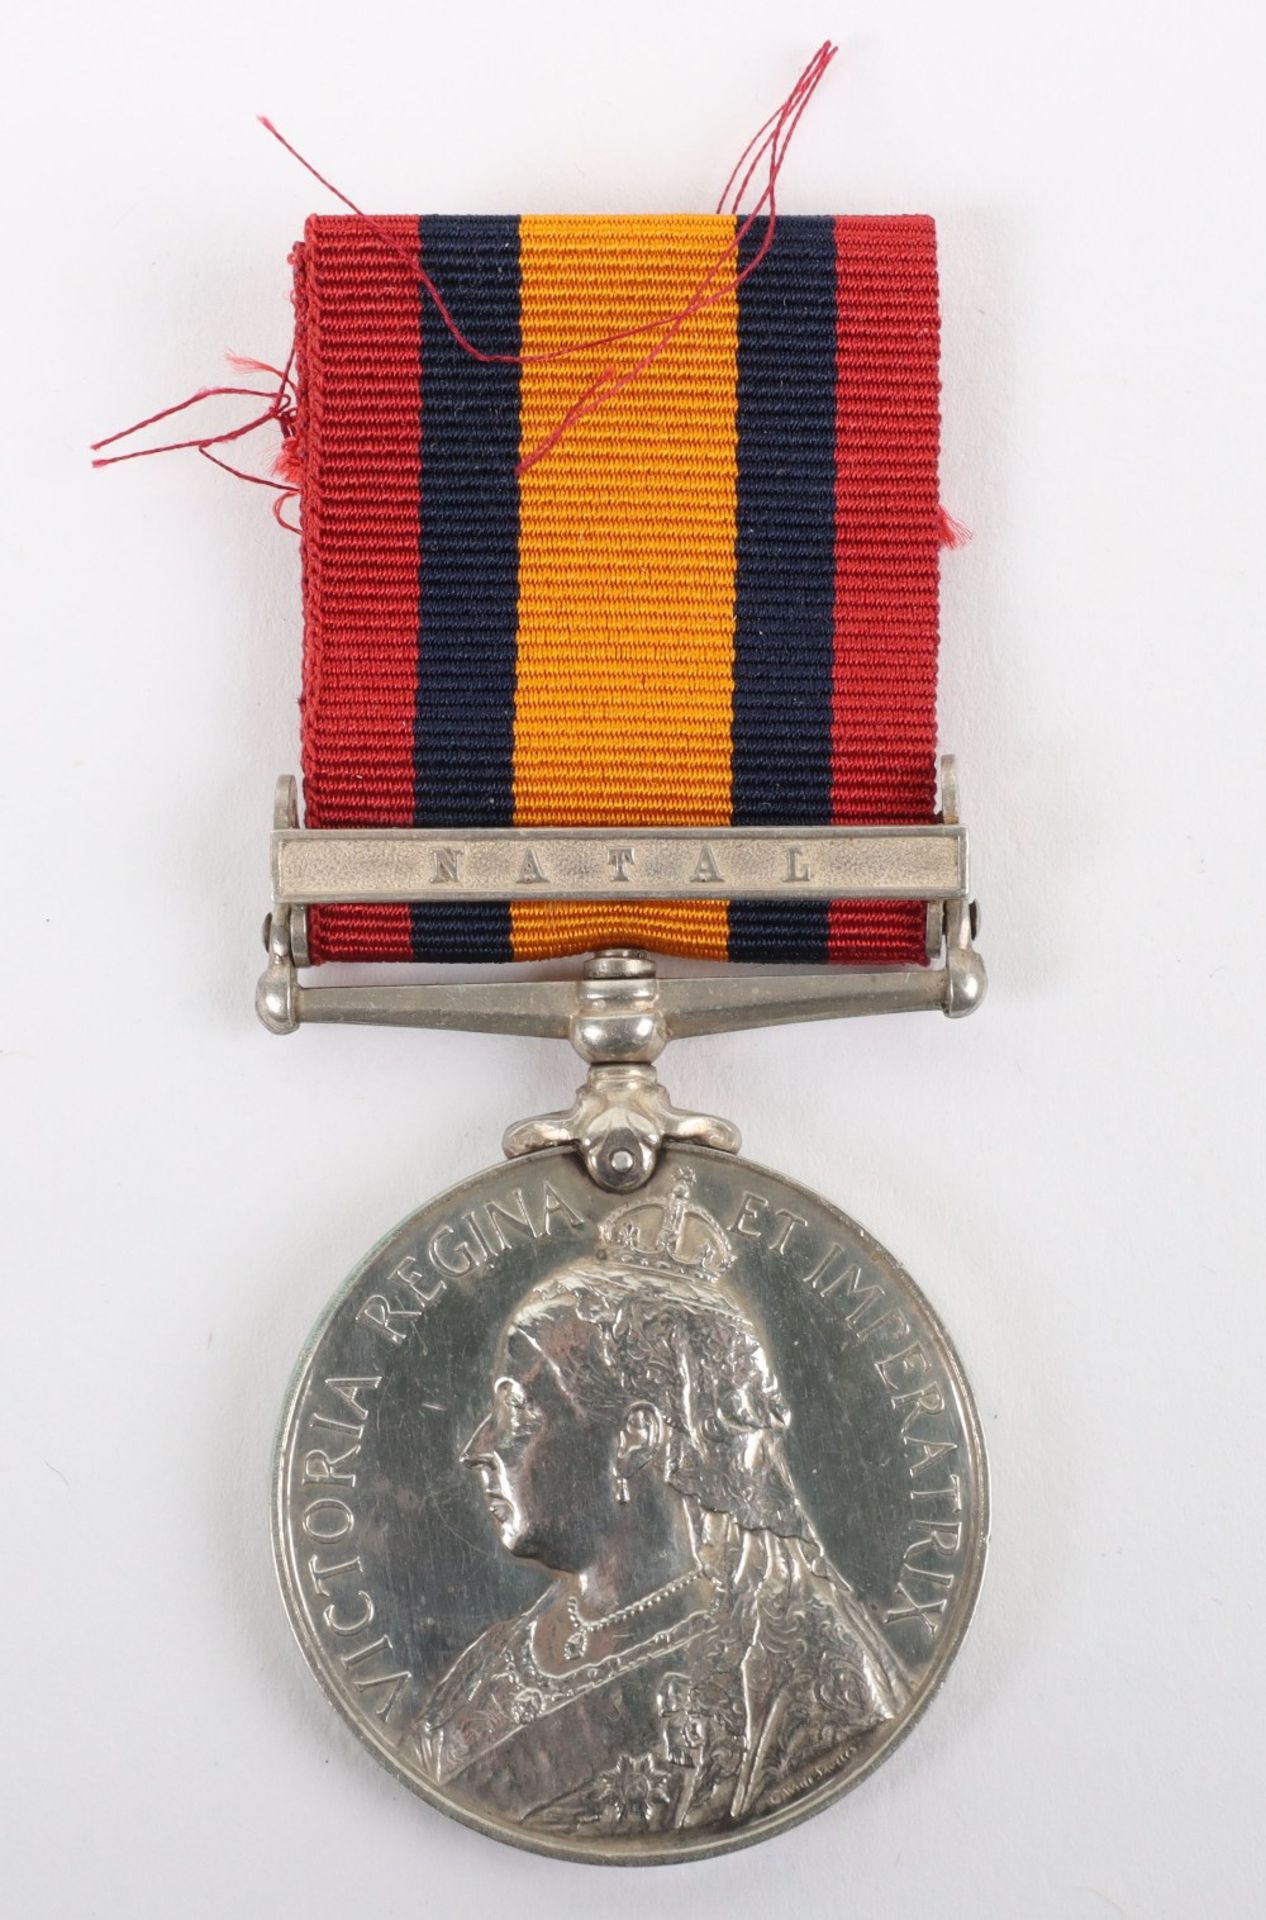 Queens South Africa Medal Awarded to a Gaoler in the Natal Police